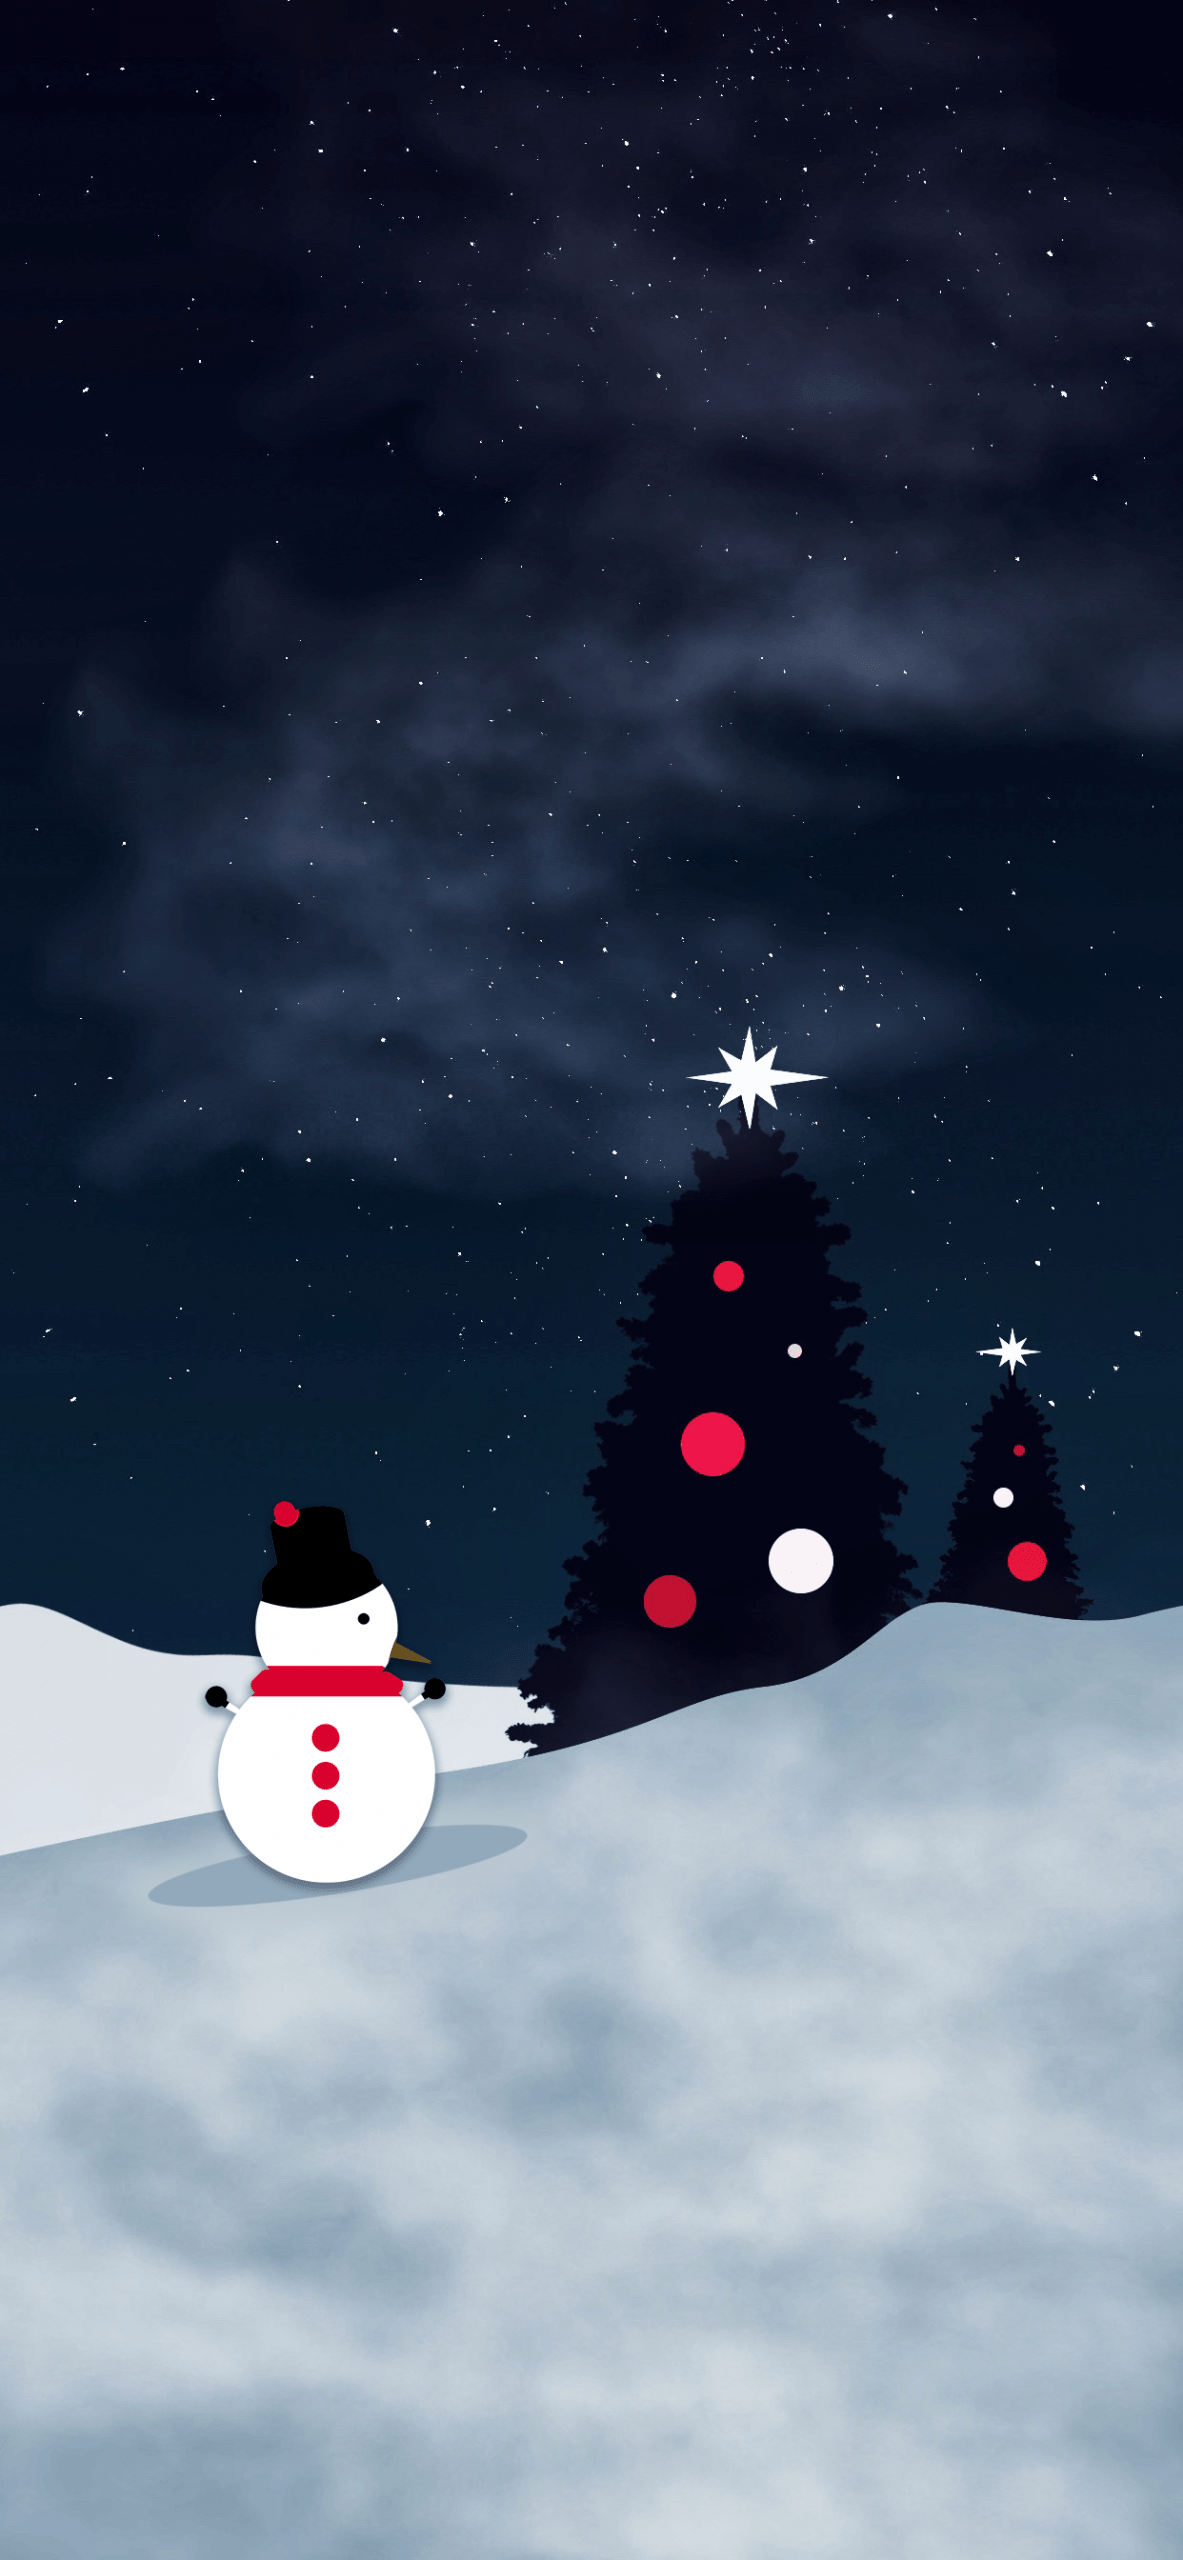 A snowman standing in a snowy field with a starry sky above - White Christmas